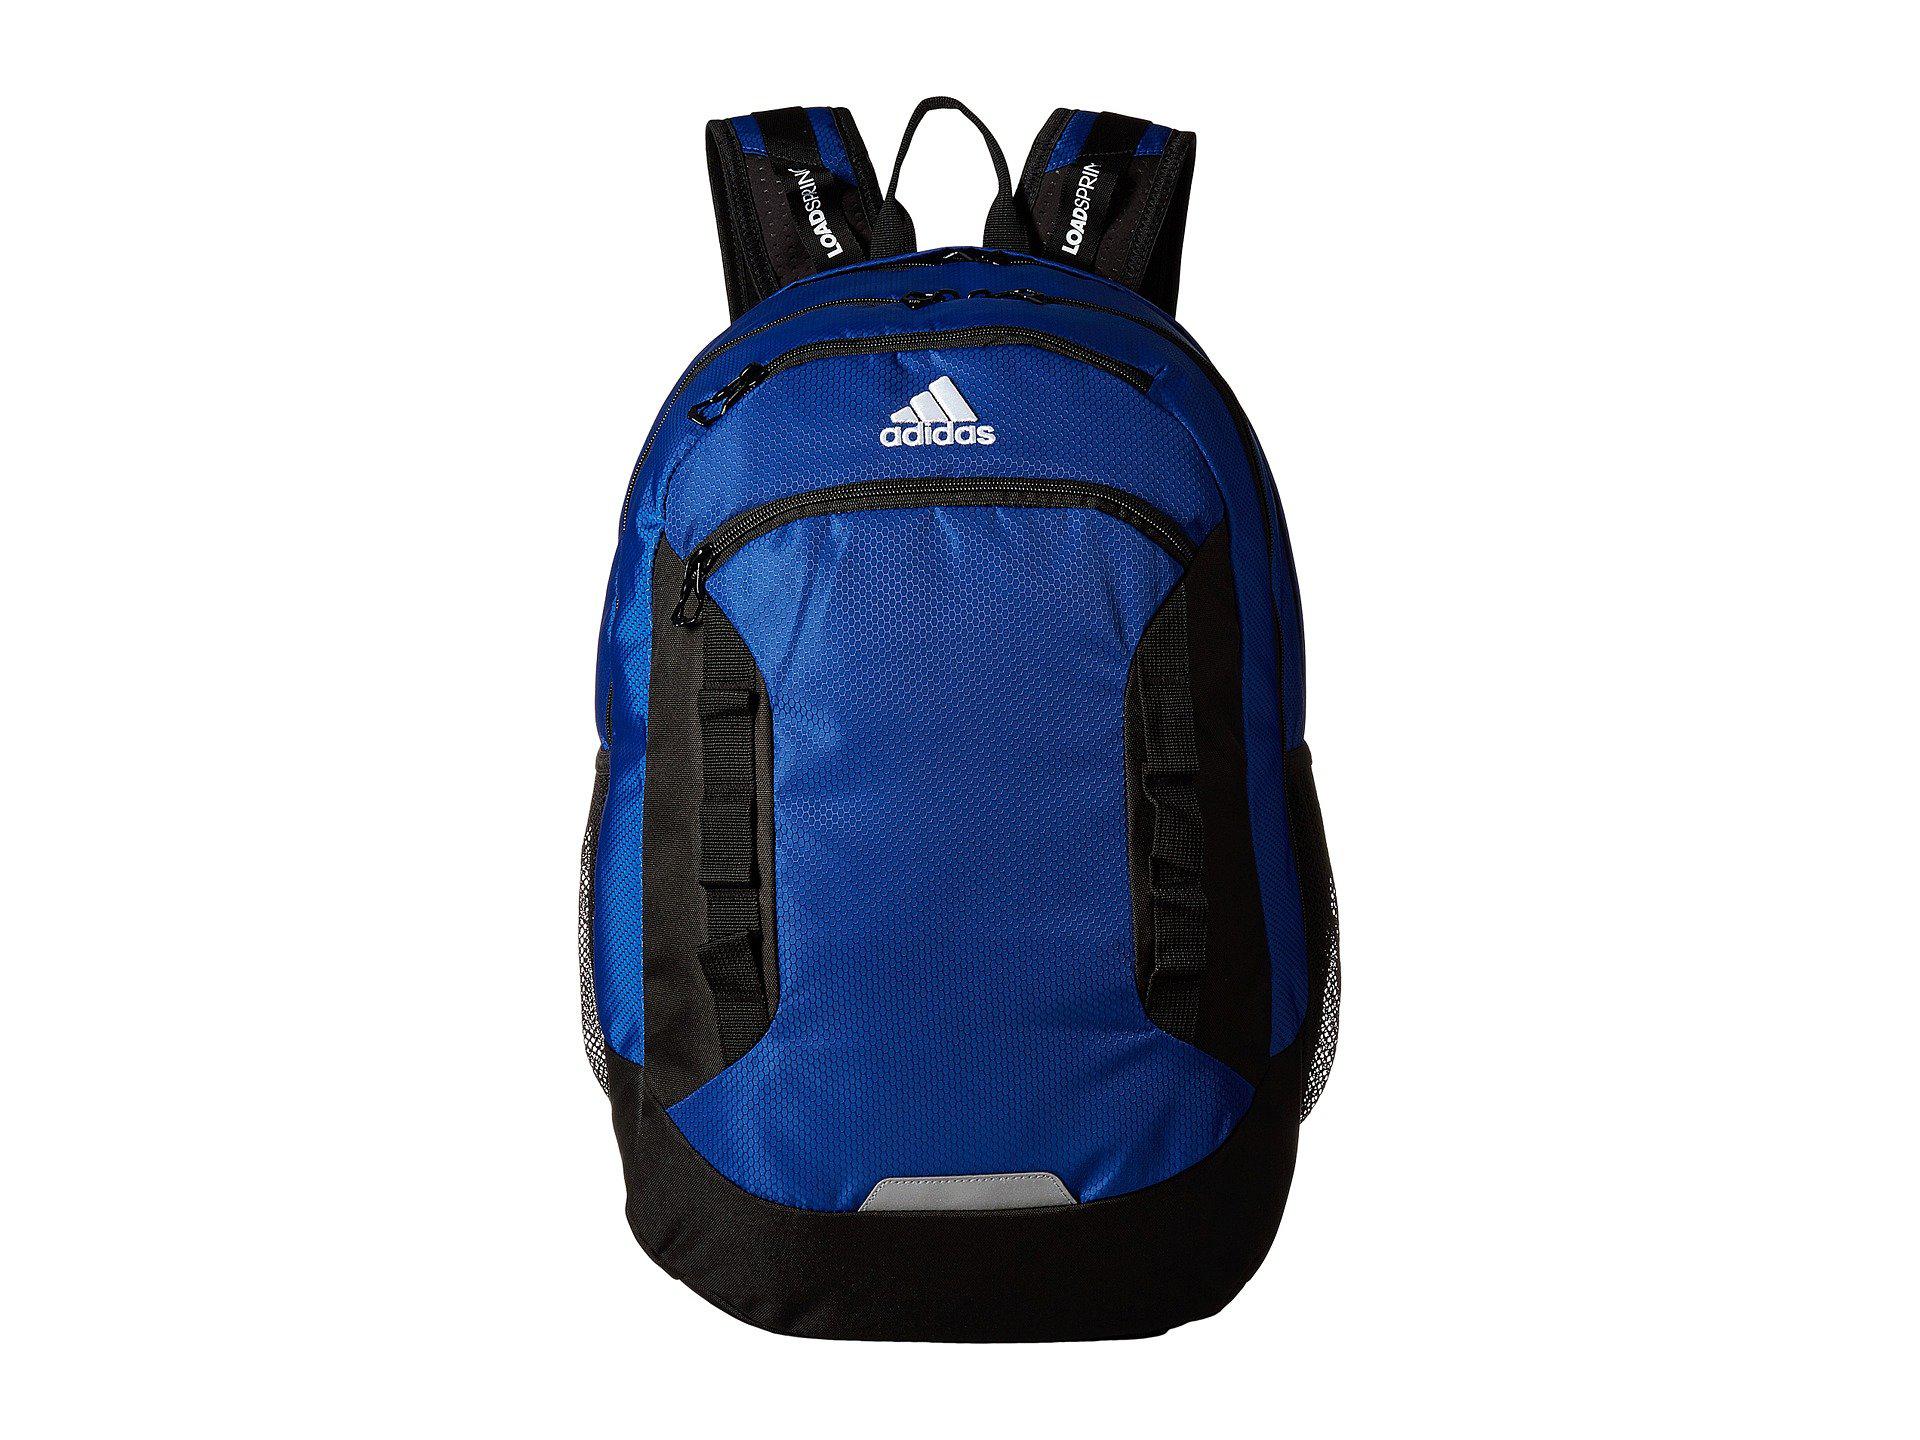 adidas excel 3 backpack